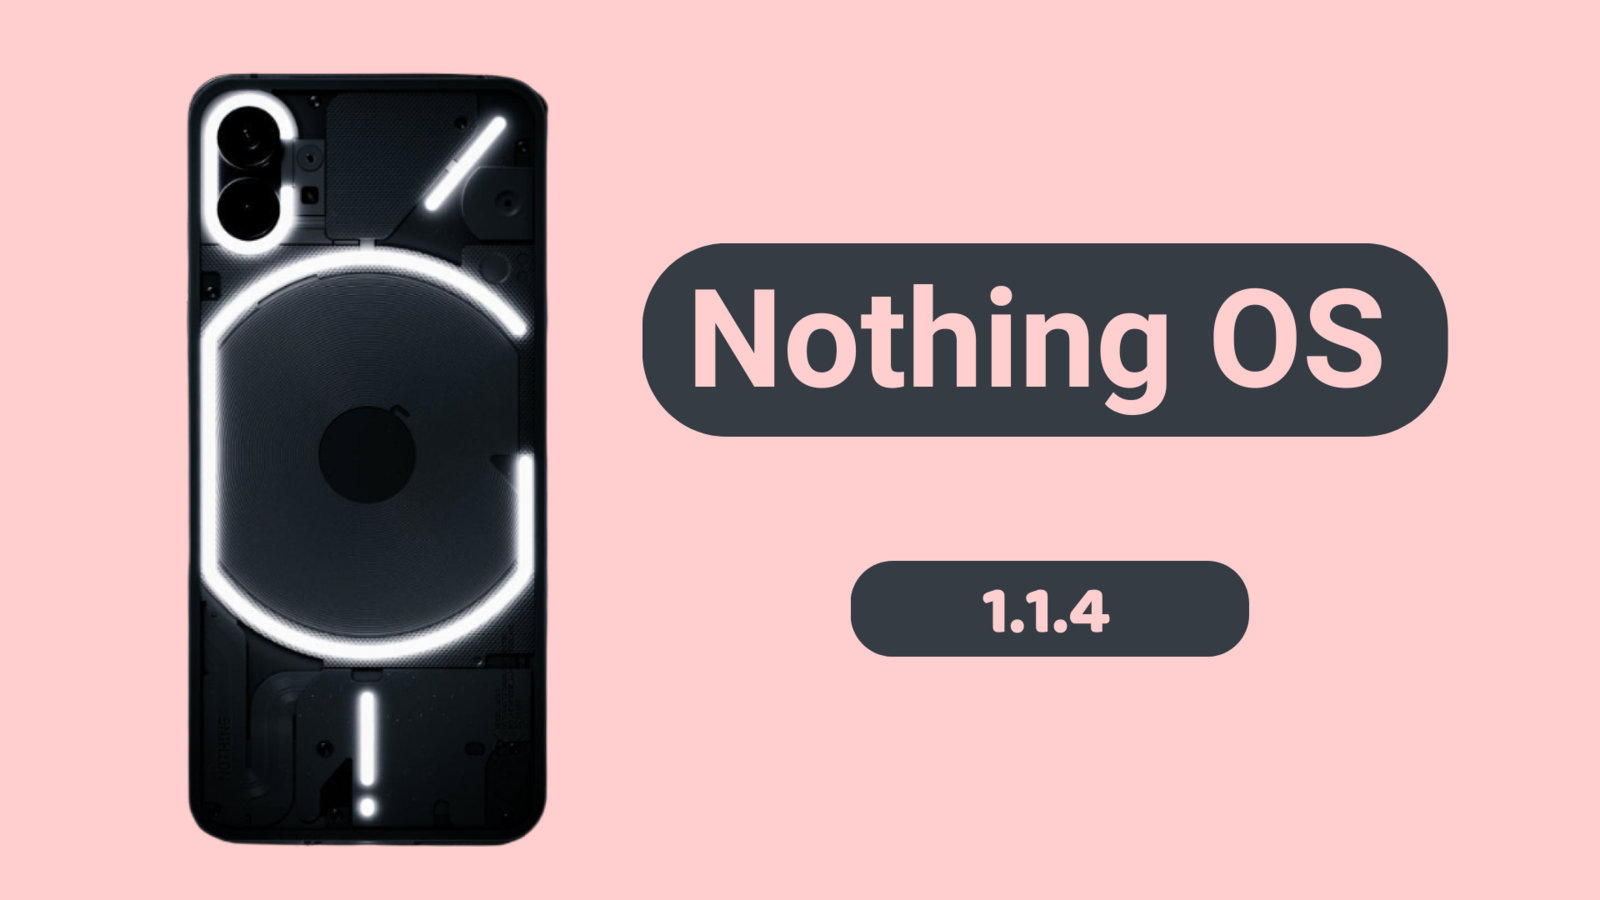 Download Nothing OS 1.1.4 OTA Update for Nothing Phone 1